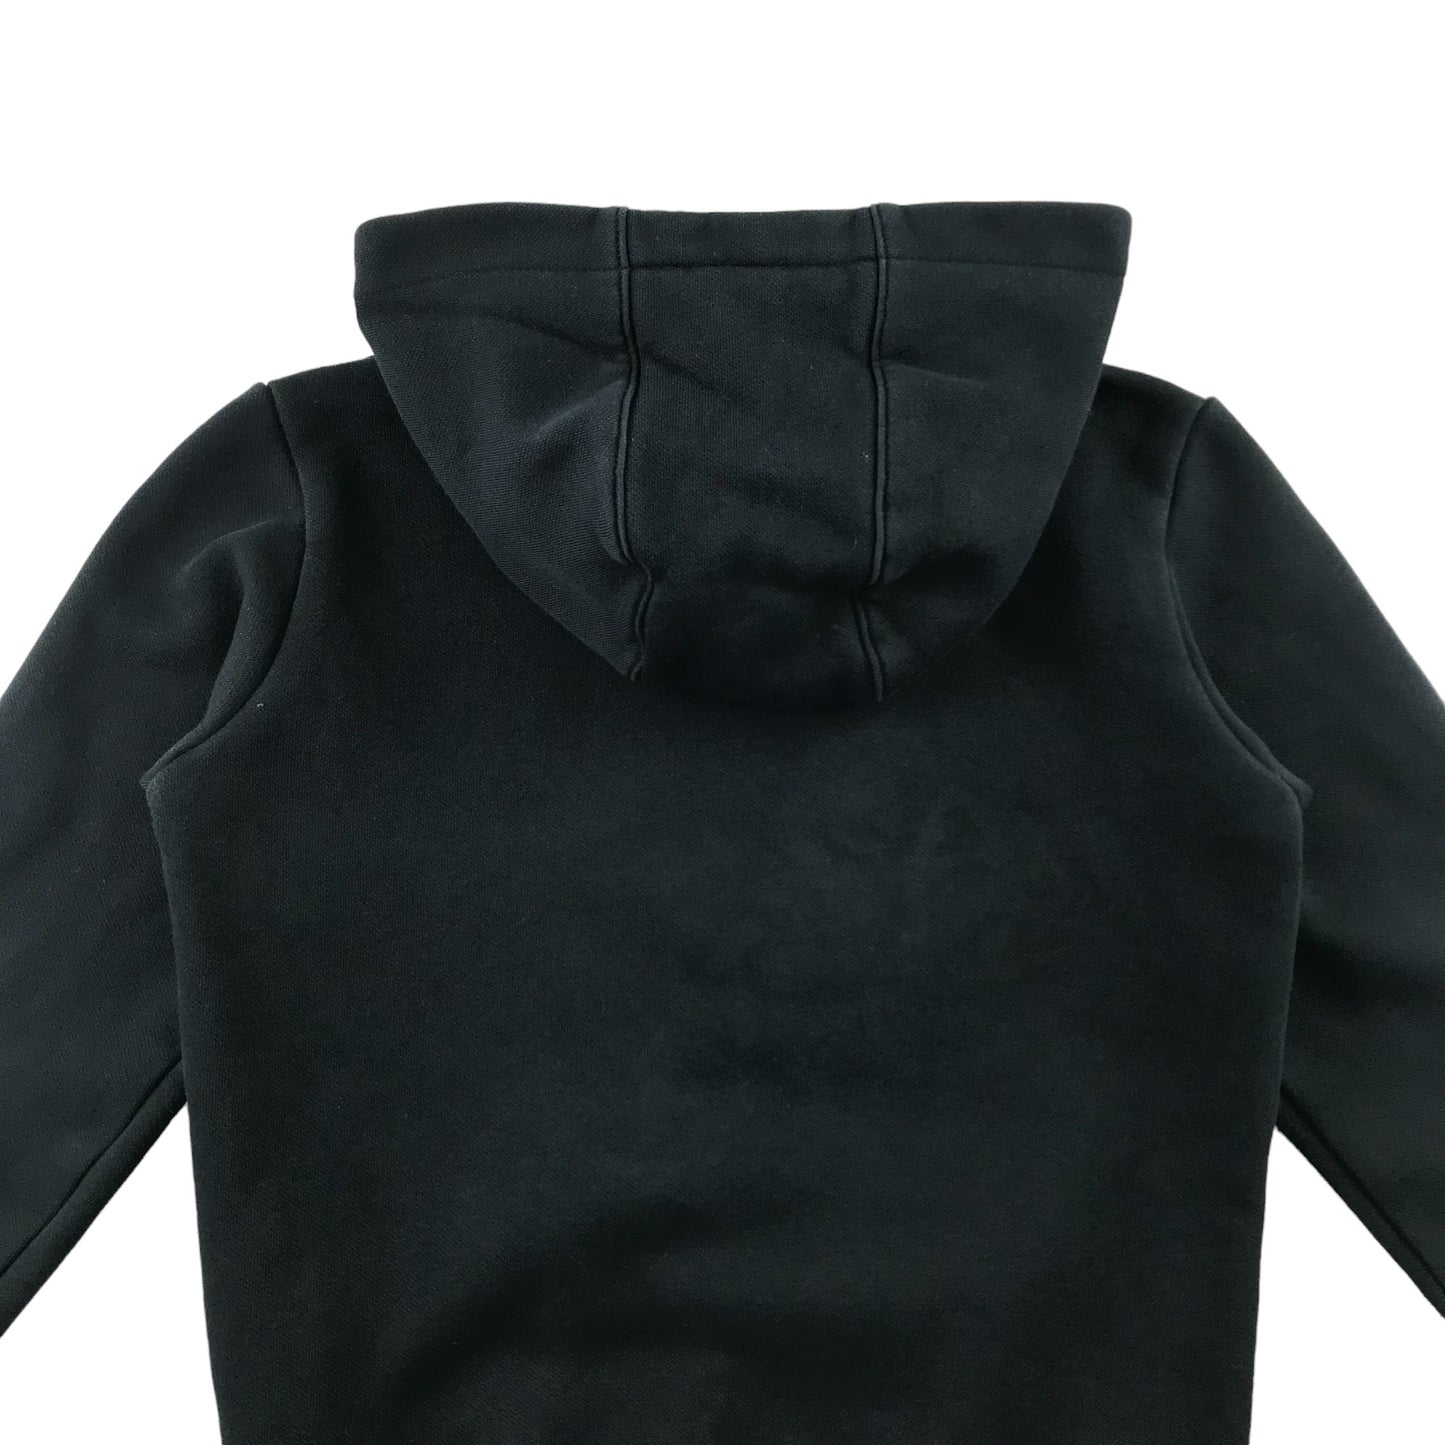 Puma hoodie 7-8 years black classic pullover with logo